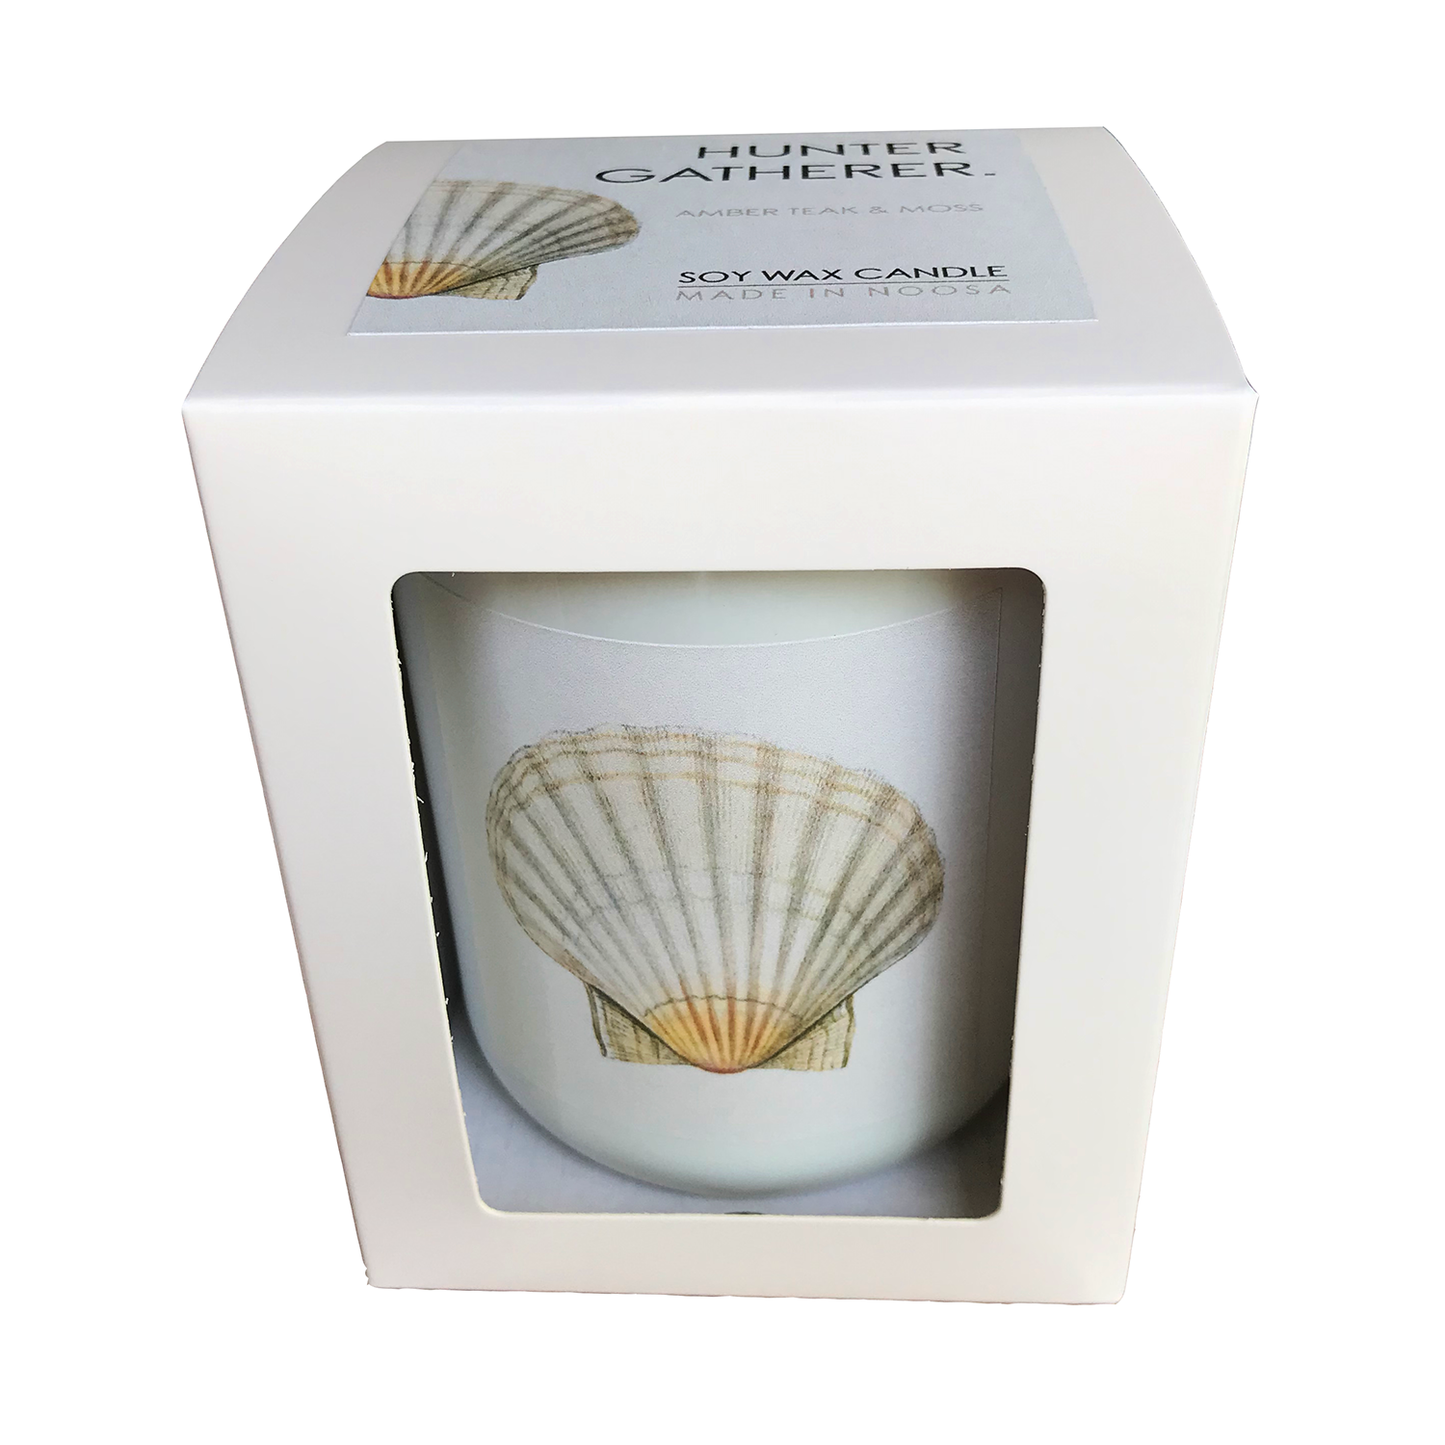 Hunter Gatherer / Pure soy wax shell candle / SCALLOP SHELL DESIGN / Boxed